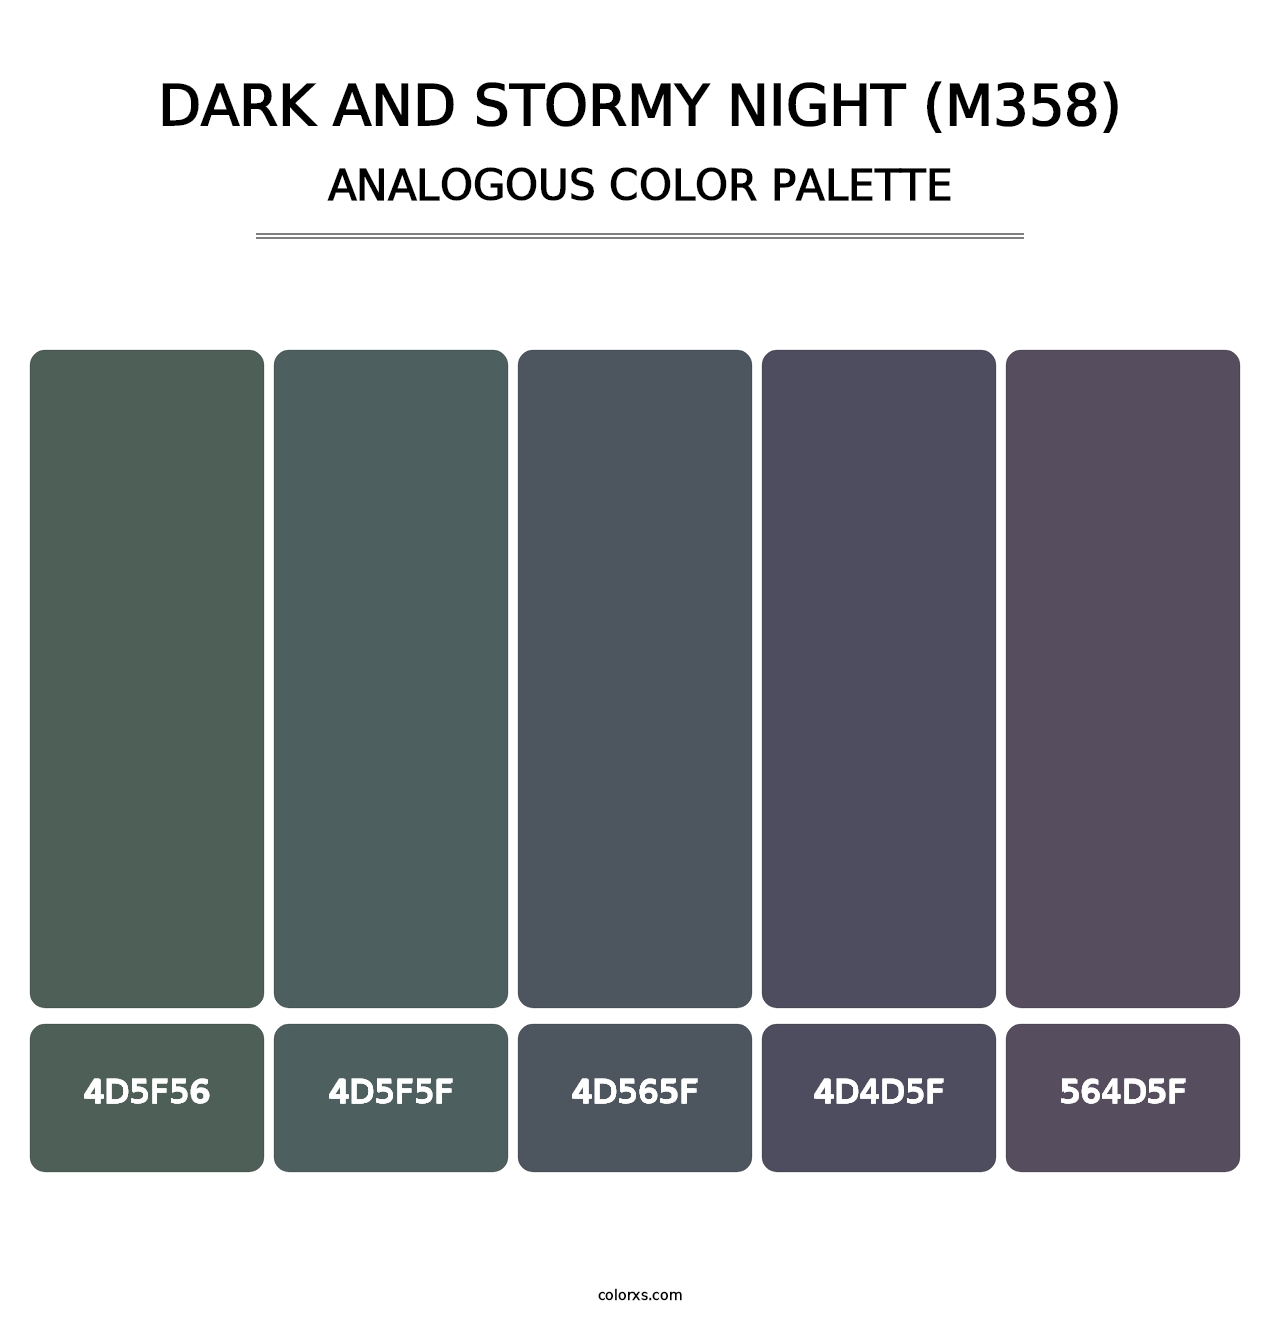 Dark and Stormy Night (M358) - Analogous Color Palette